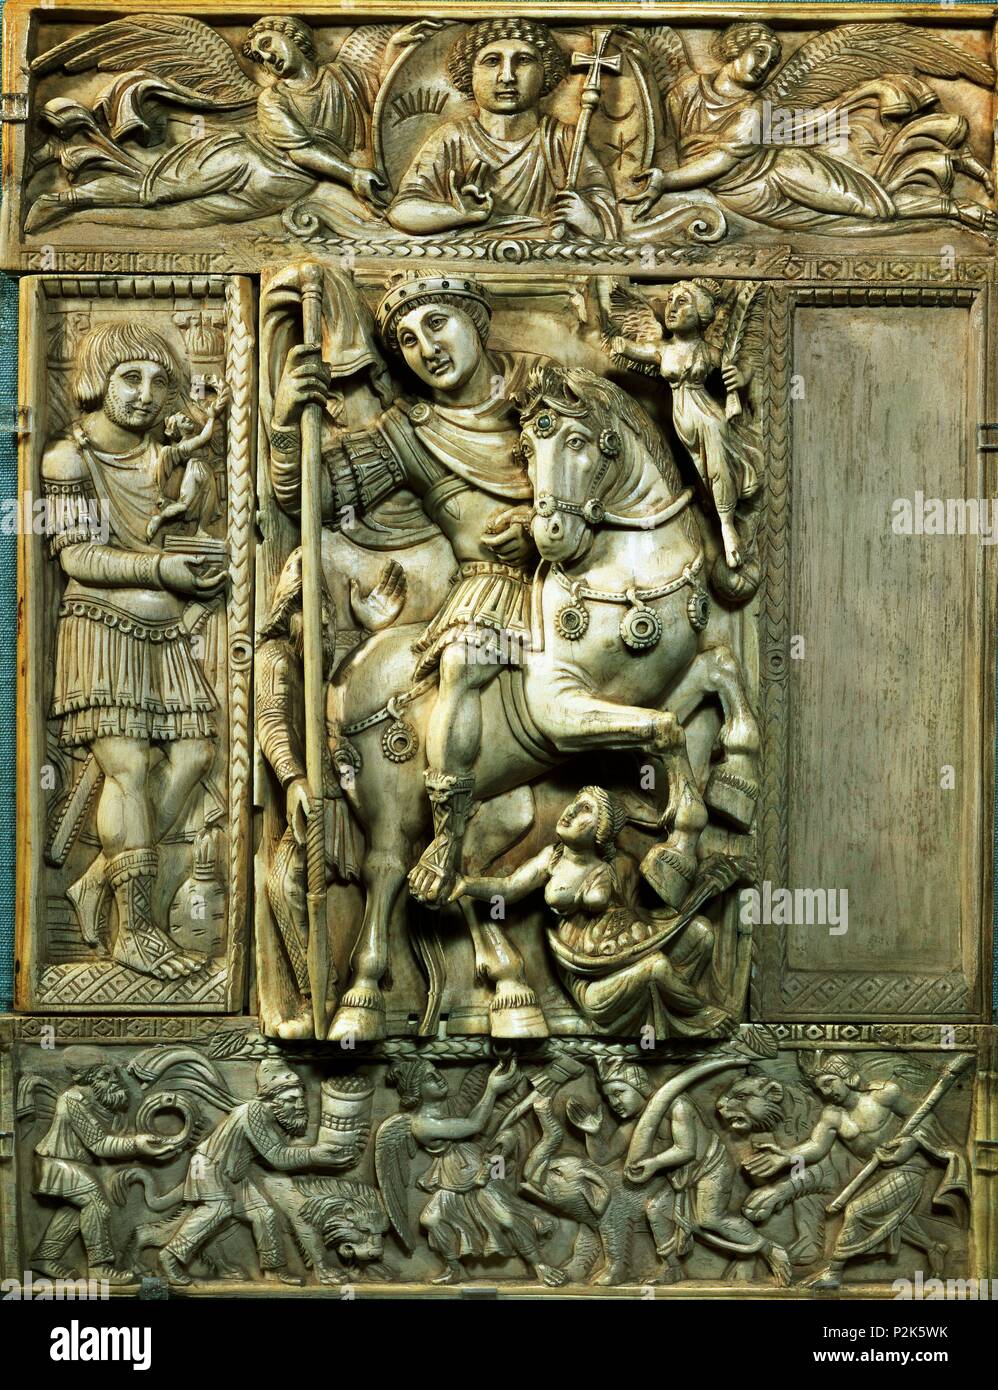 Ivory diptych. Detail from the emperor on a horse. Byzantine 6th century. 34 x 26.6 cm. Paris, musée du Louvre. Location: MUSEO DEL LOUVRE-EBORARIA, FRANCE. Stock Photo